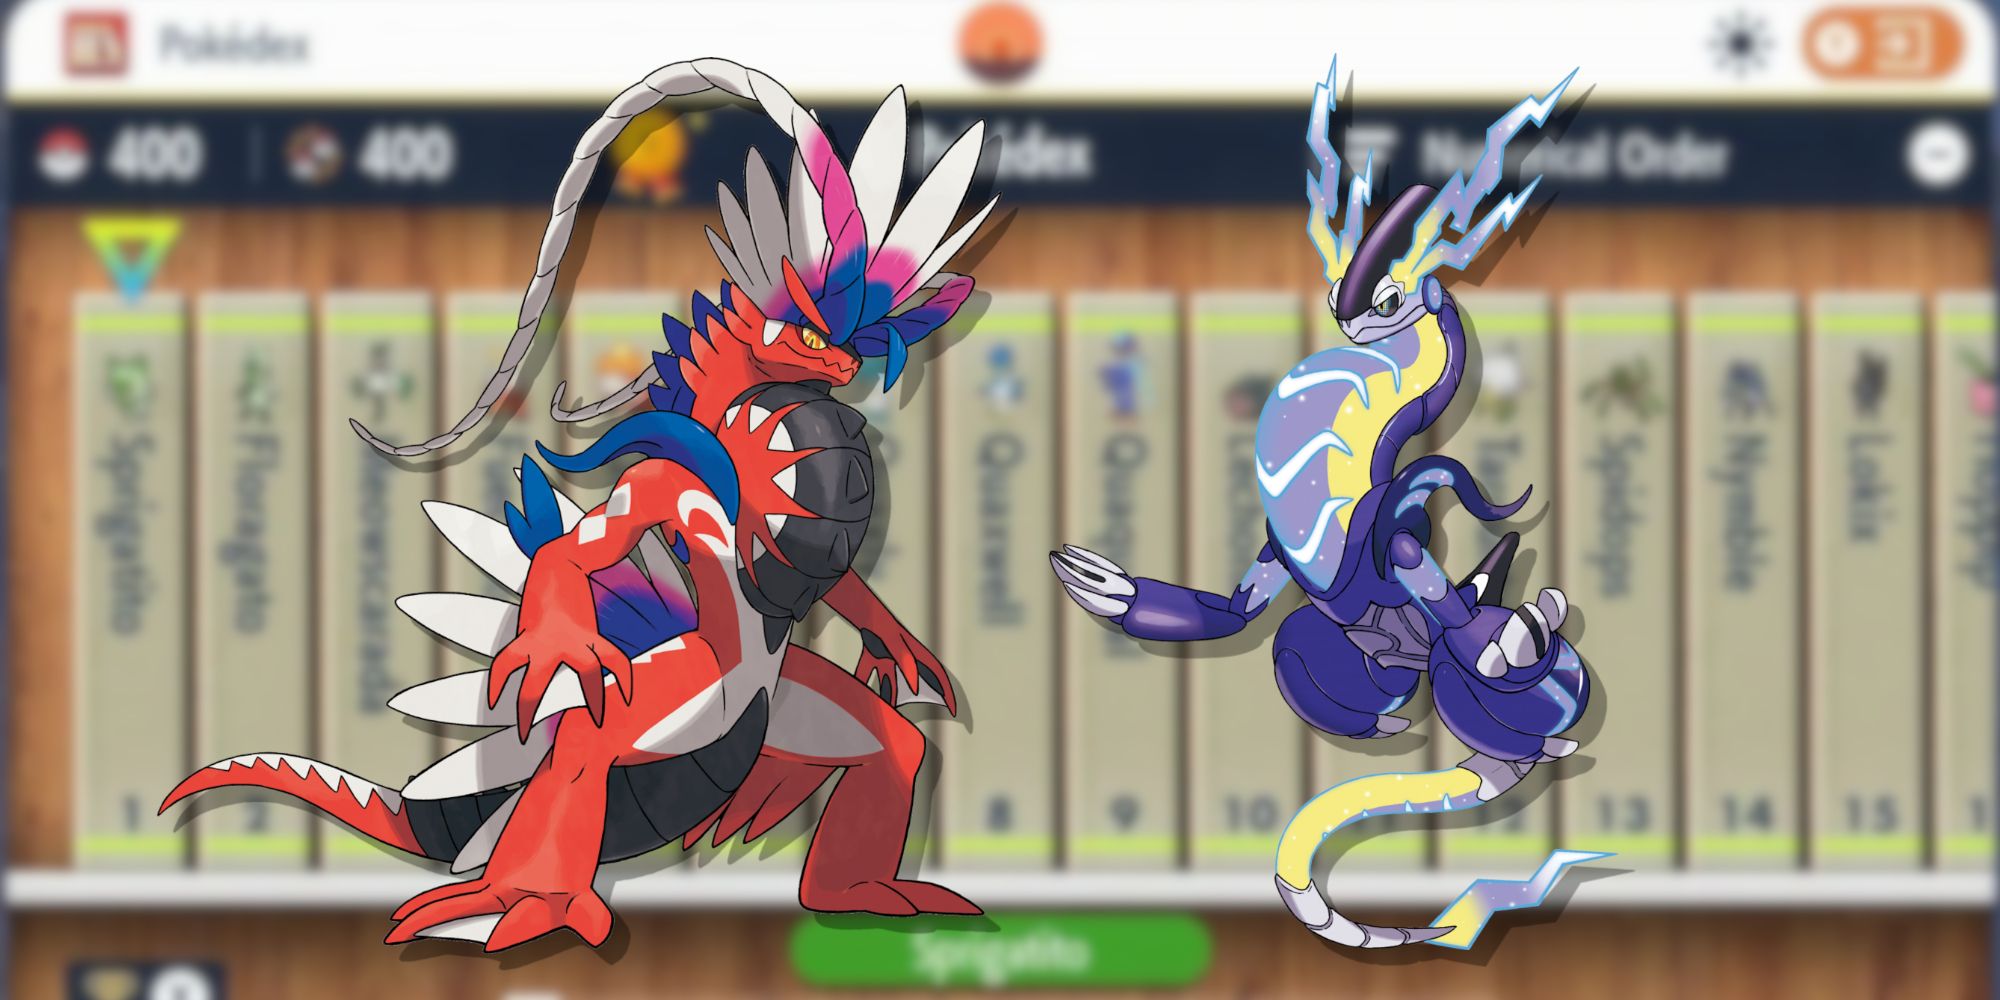 Image of the Pokedex in the background and Koraidon and Miraidon in the foreground in Pokemon Scarlet & Violet.